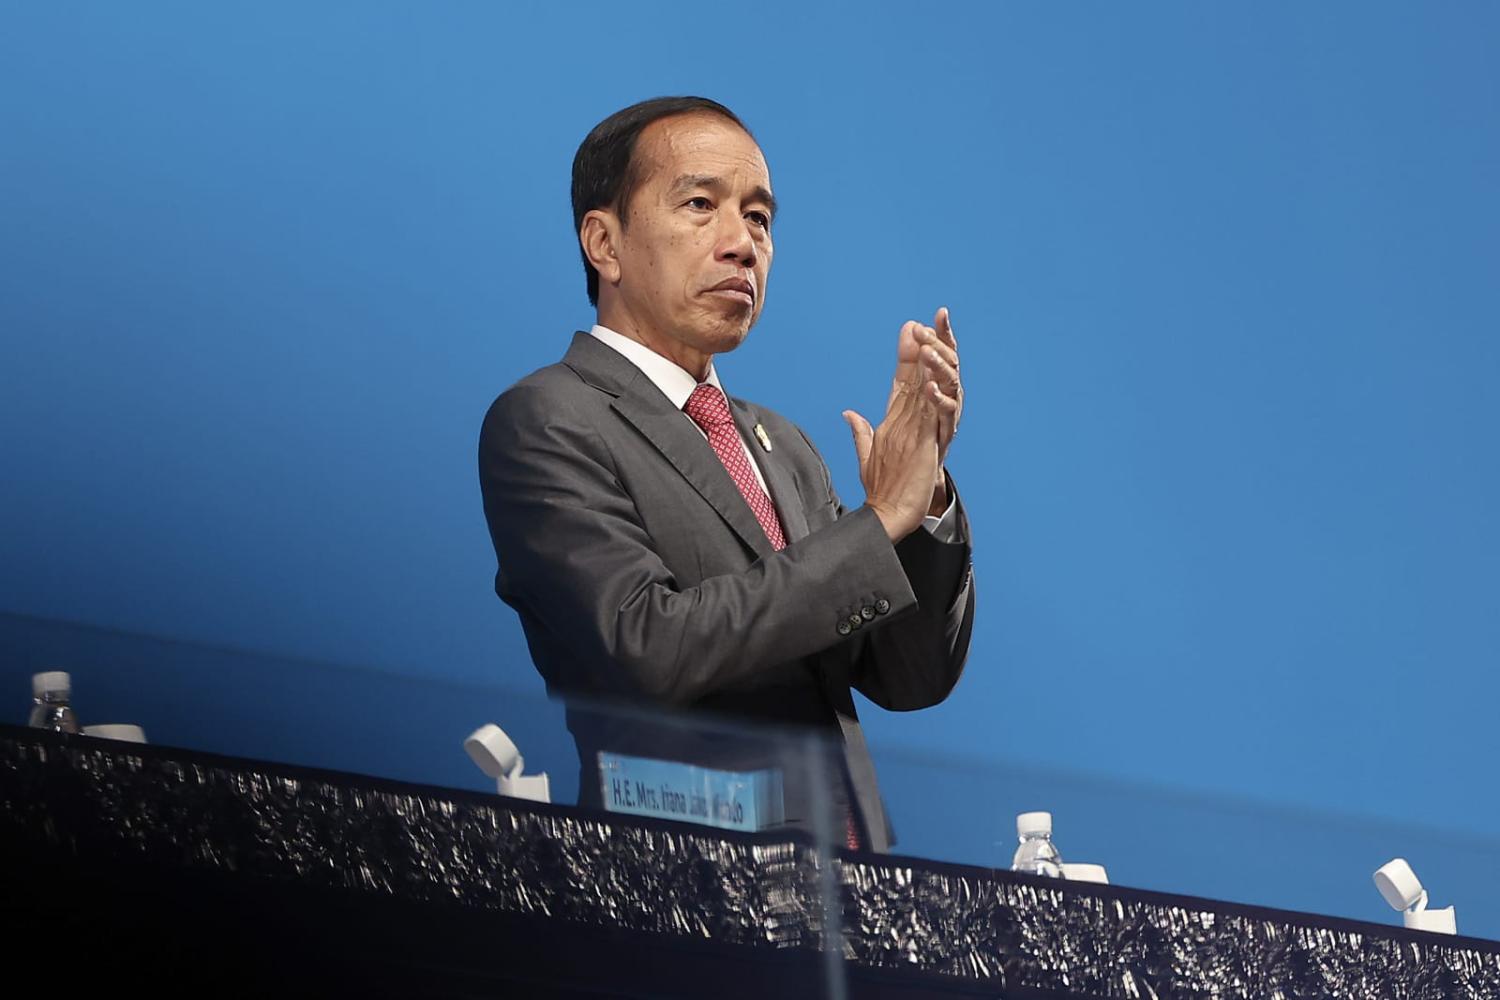 Indonesian President Joko Widodo last month during a visit to Chengdu, China (Lintao Zhang/Getty Images)